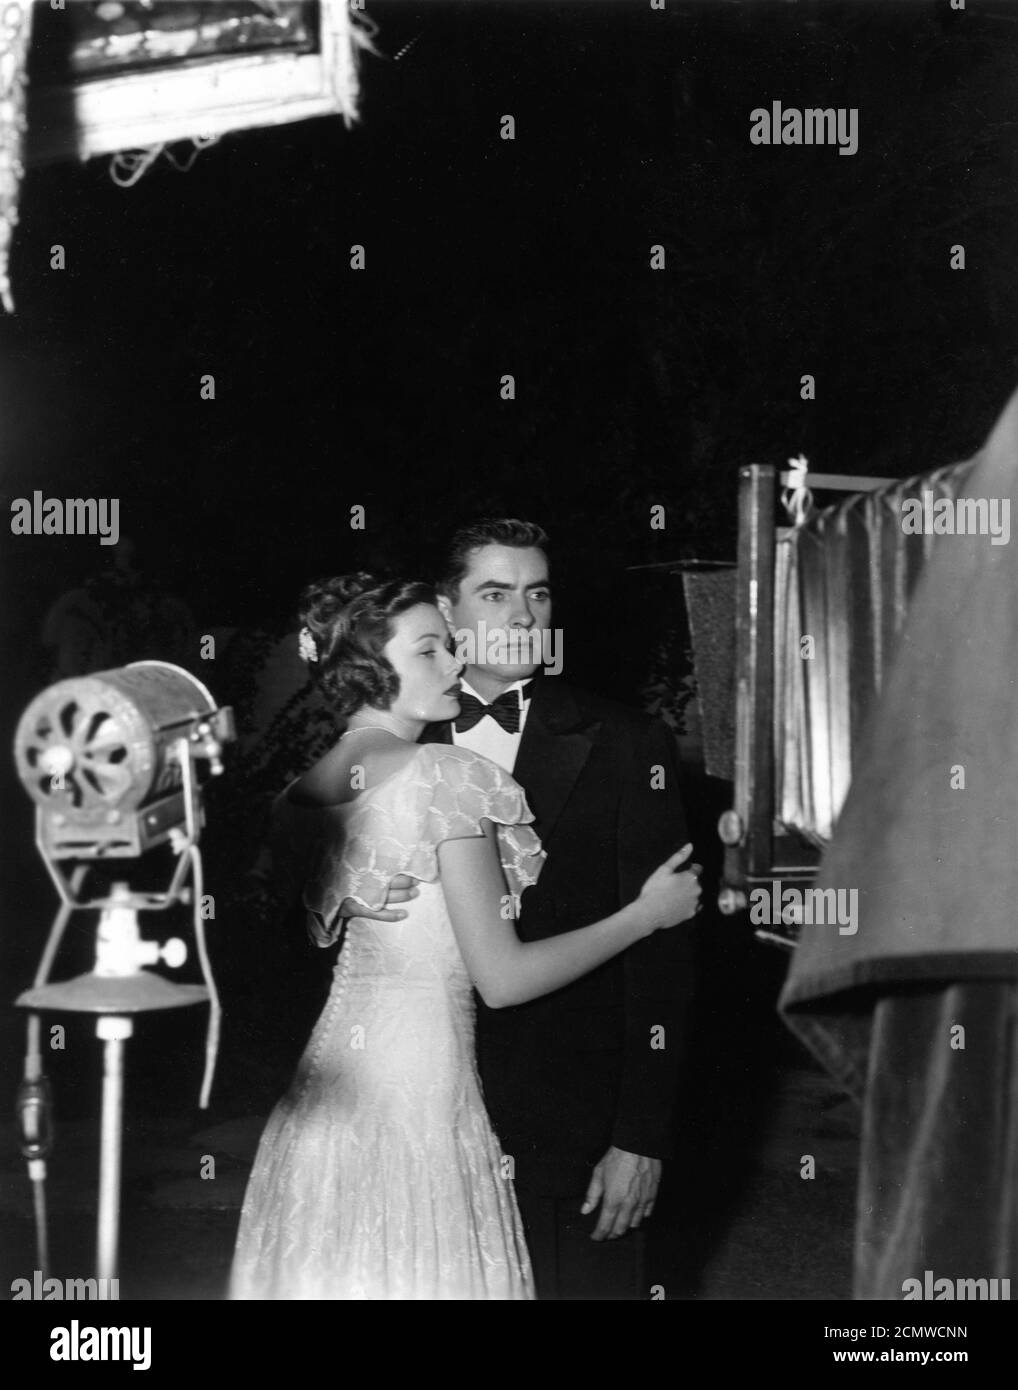 GENE TIERNEY and TYRONE POWER on set candid posing for the still camera during filming of party scene in THE RAZOR'S EDGE 1946 director EDMUND GOULDING novel W. Somerset Maugham screenplay Lamar Trotti  music Alfred Newman producer Darryl F. Zanuck Twentieth Century Fox Stock Photo